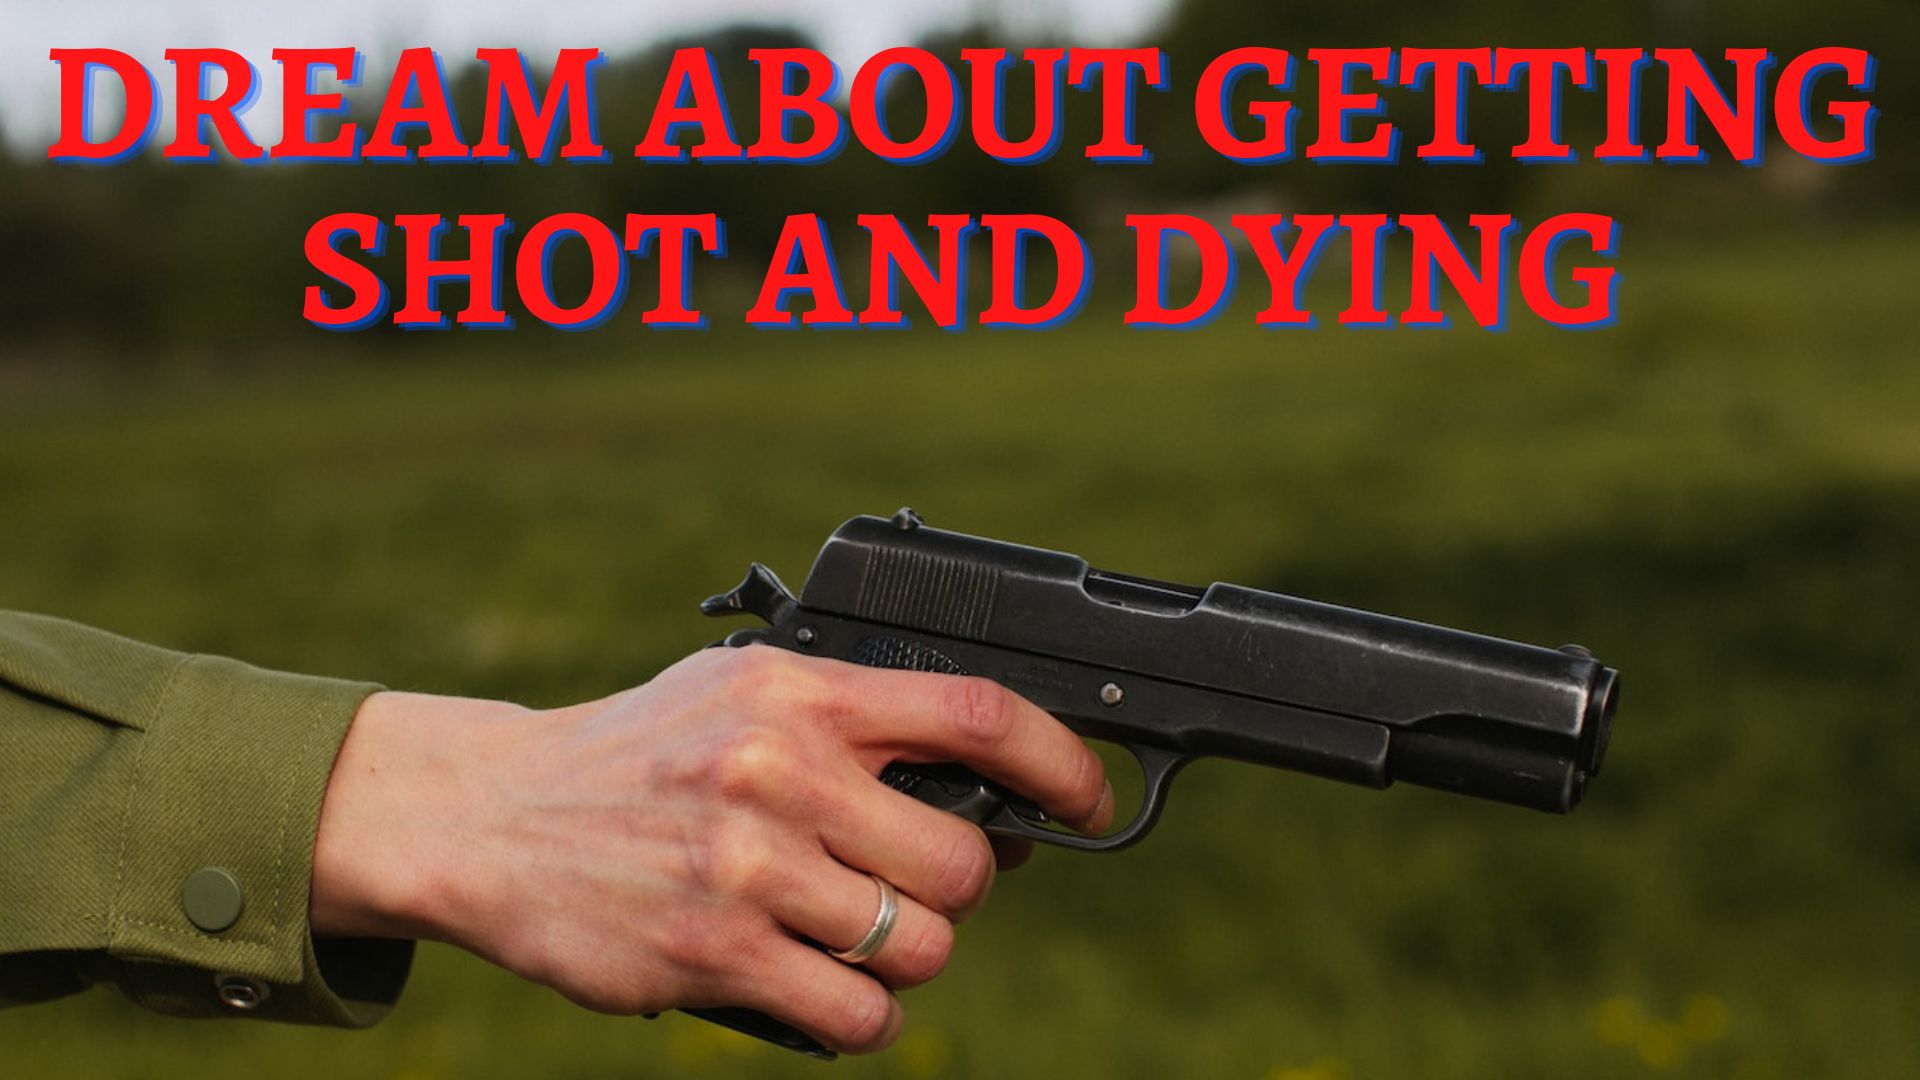 Dream About Getting Shot And Dying Meaning Radical Change In Consciousness